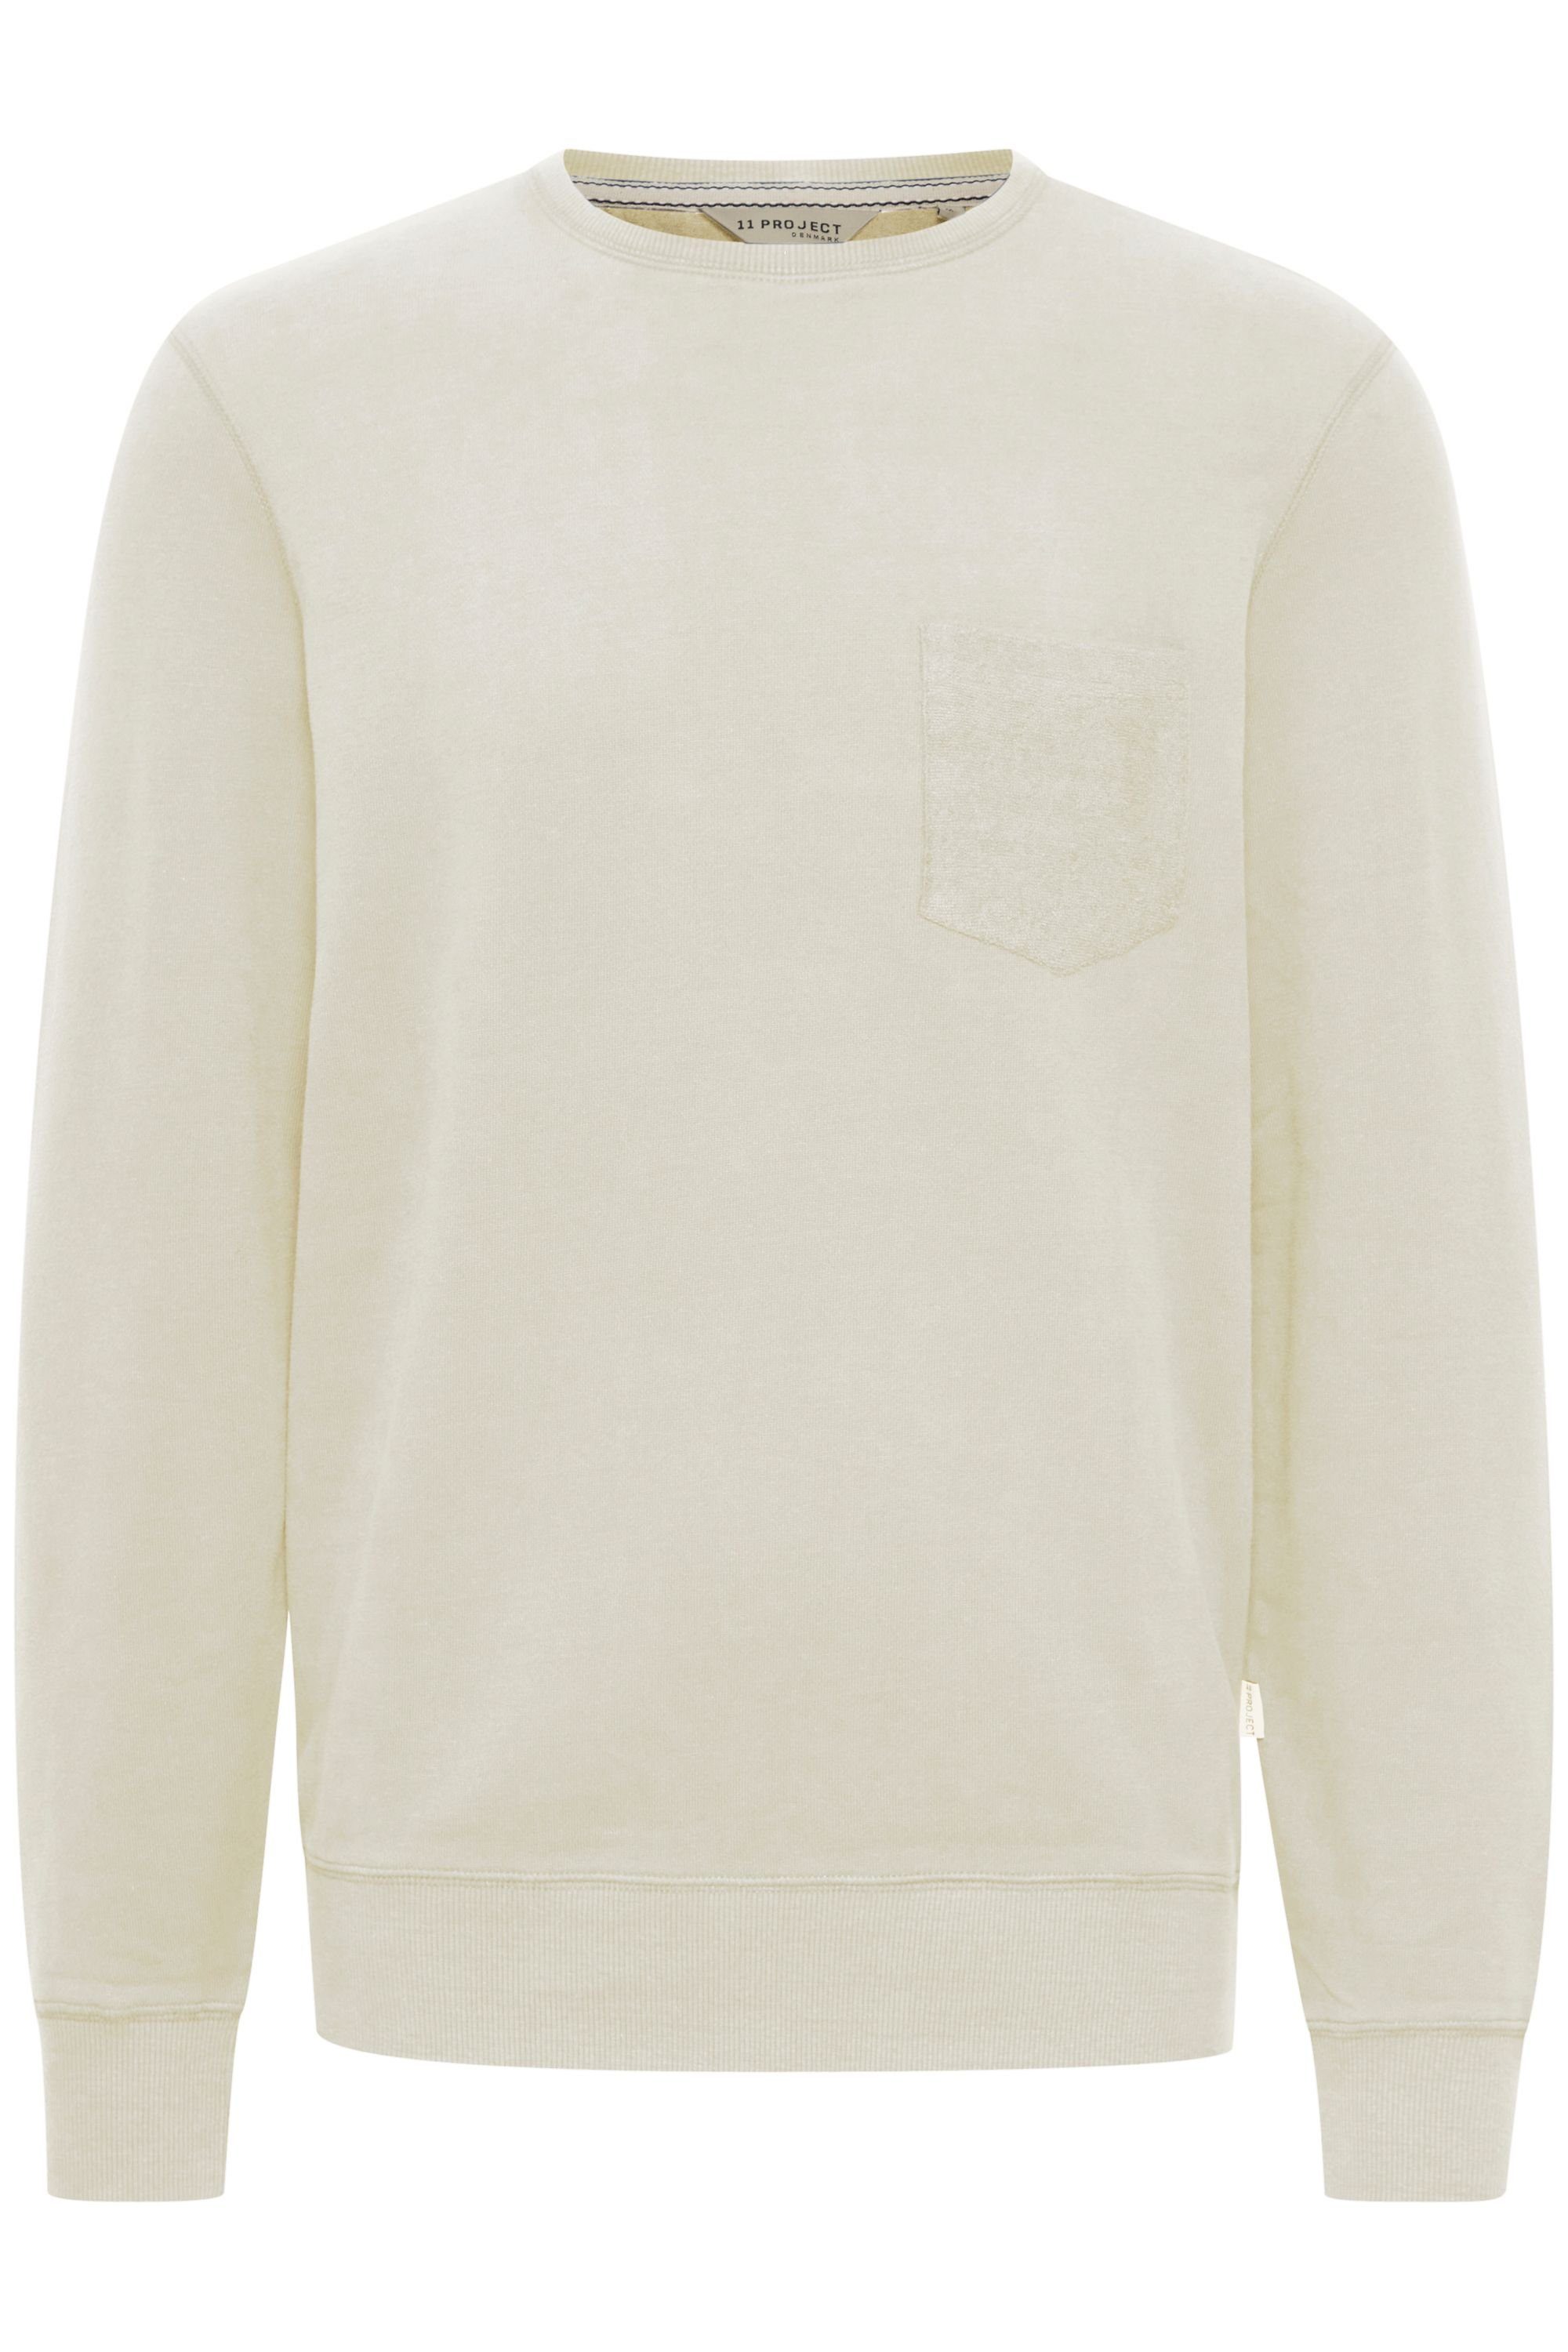 Oyster Sweatshirt 11 11 PRPulo Project Gray Project